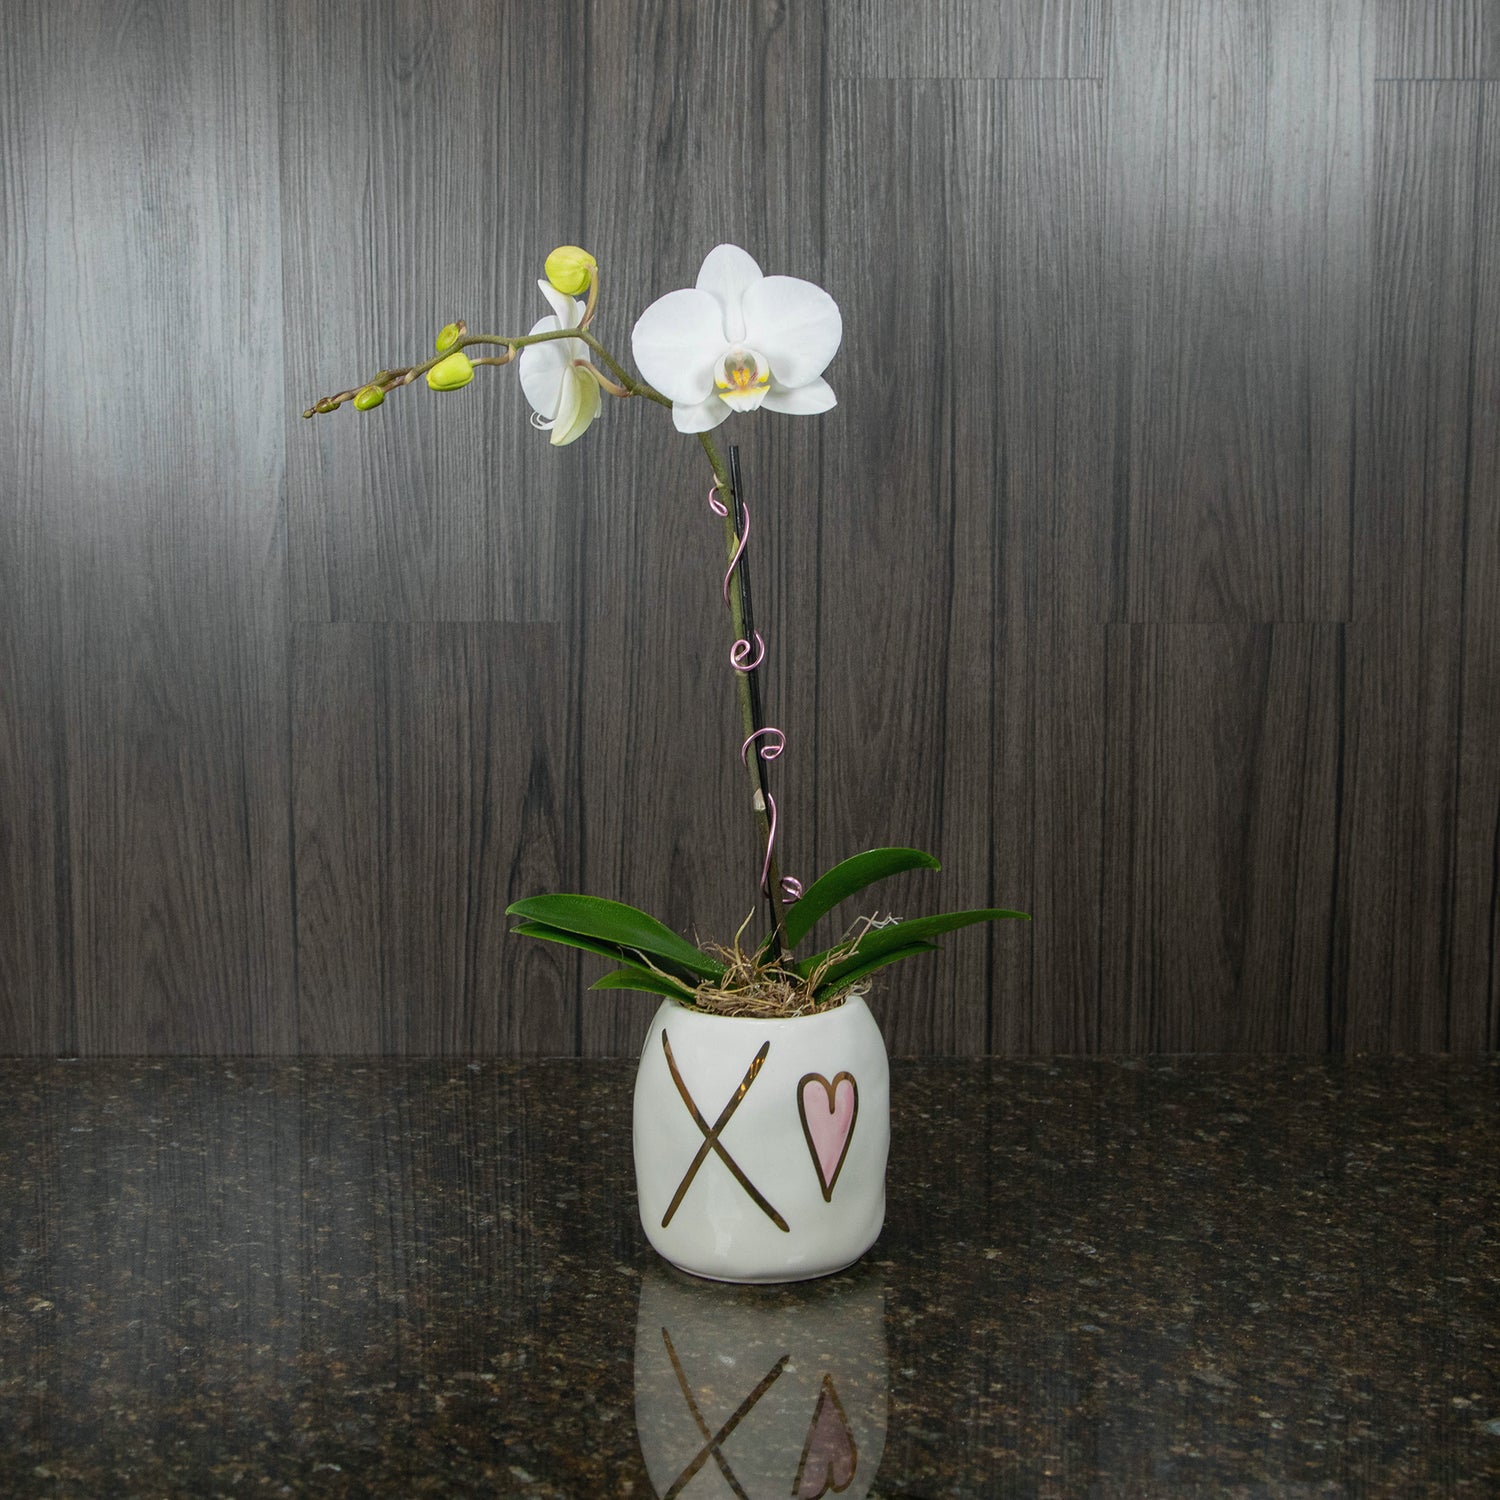 a small white orchid plant in a ceramic vase with "XO" on the front